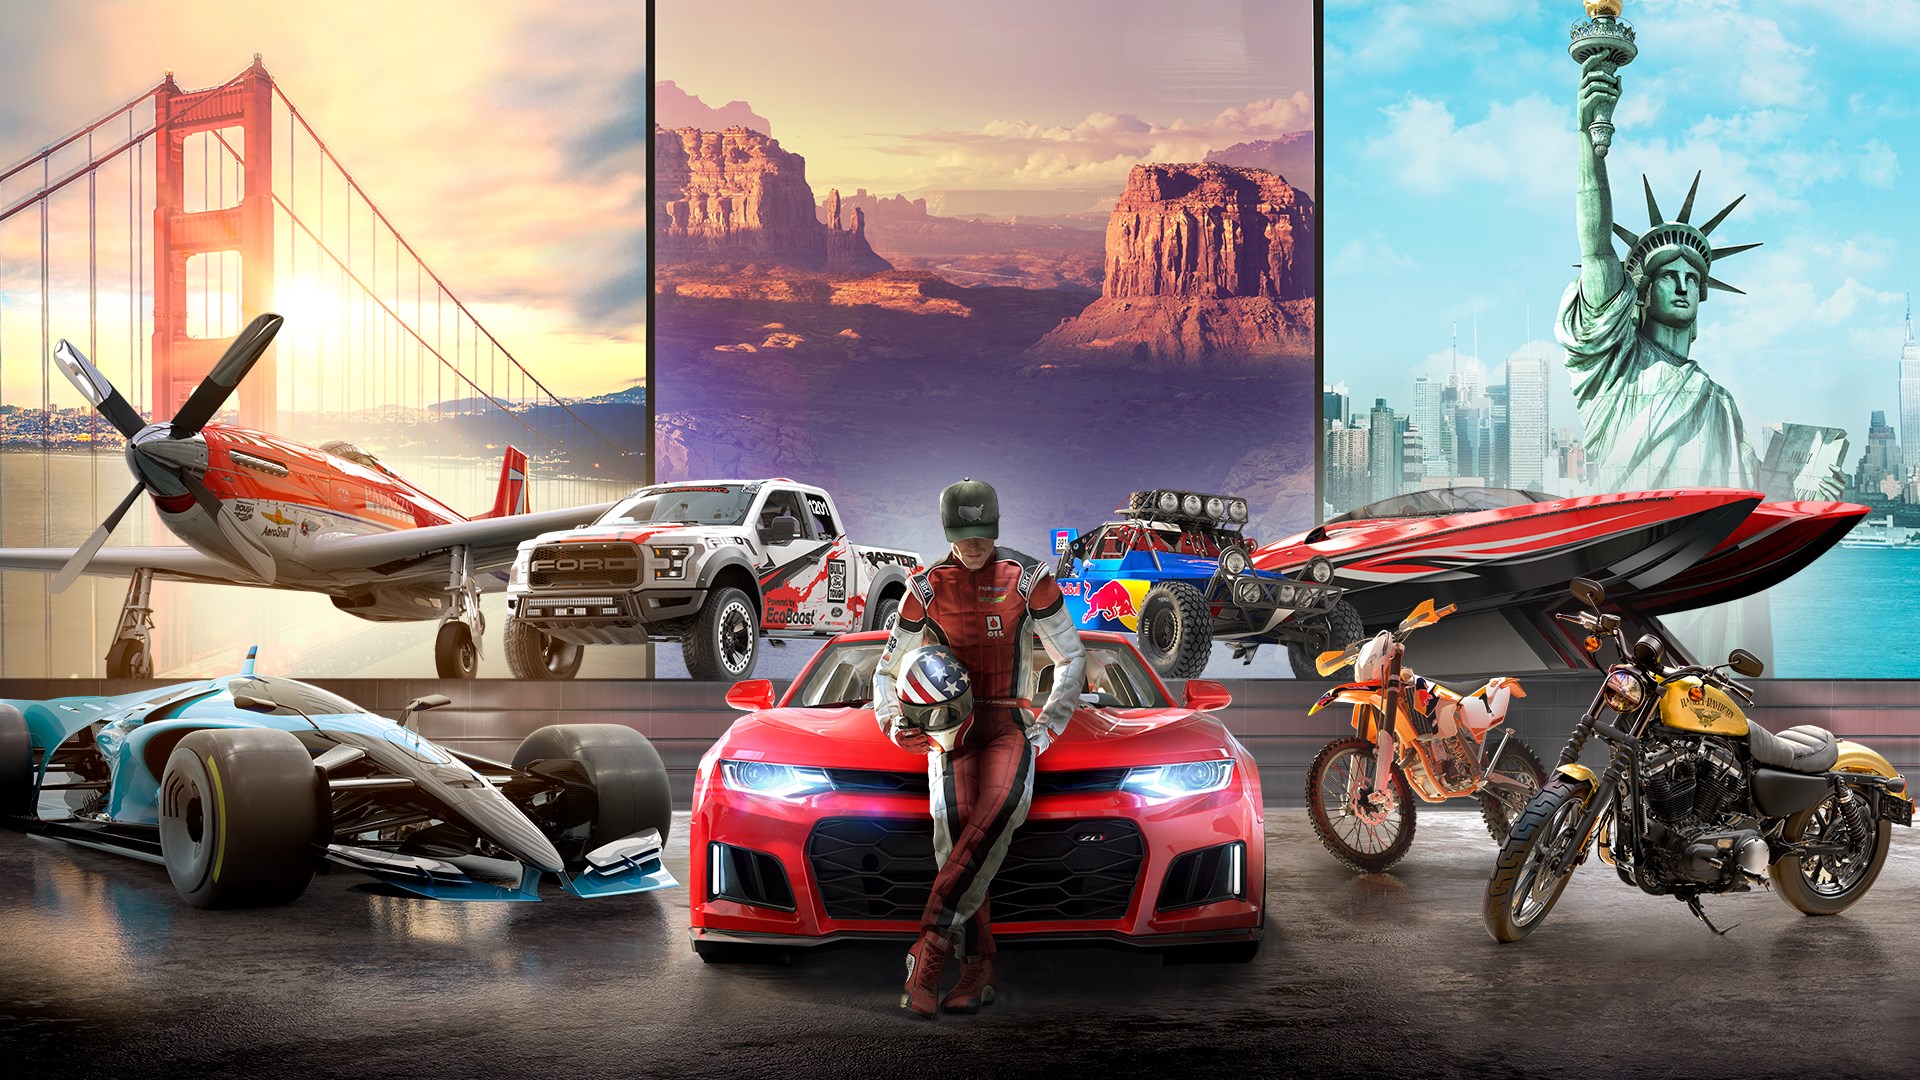 the crew 2 xbox one digital download